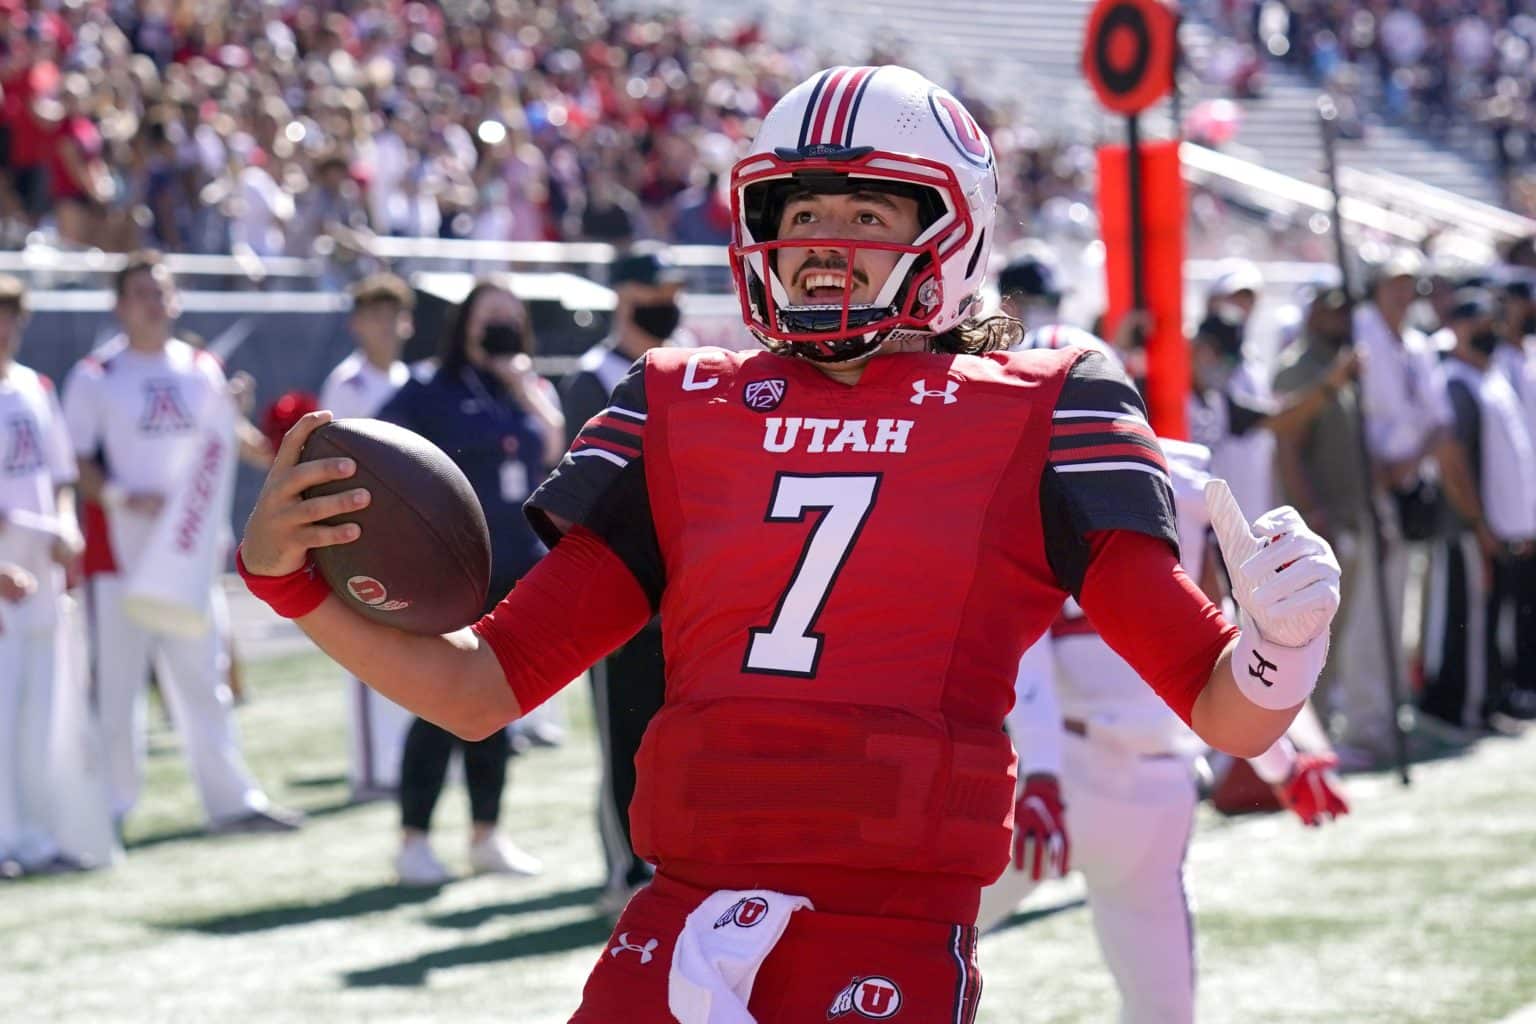 College Football Week 5 Risers and Fallers The Utes Keep Rising